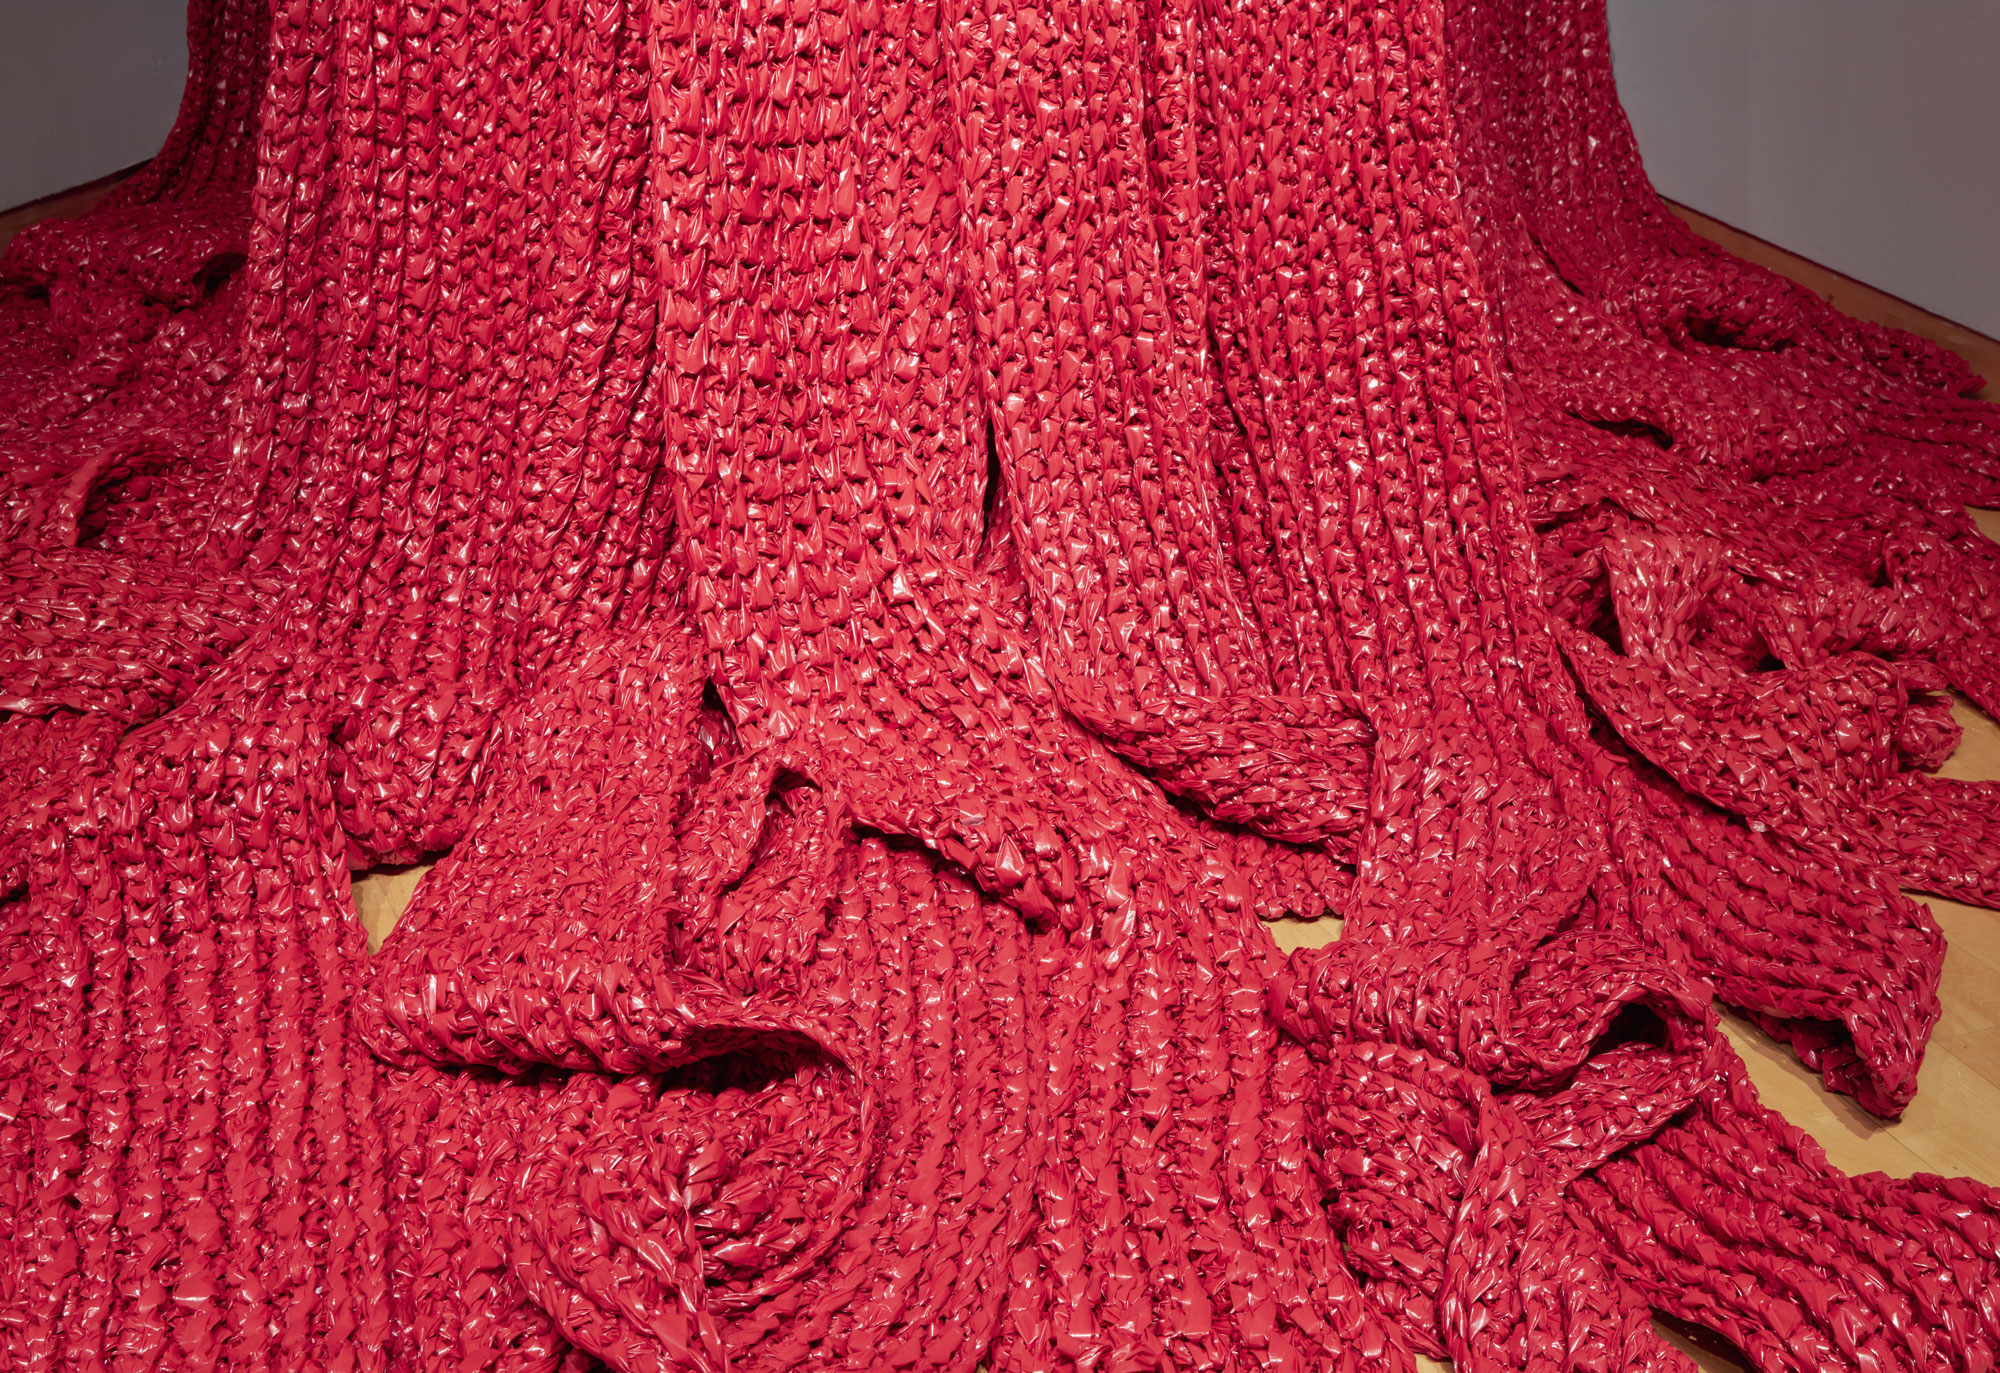 Akiko Kotani, Red Falls (detail), 2021. crocheted polyethylene, dimensions variable. Courtesy of the artist. Installation view of Skyway 20/21 exhibition at USF Contemporary Art Museum. Photo: Will Lytch.